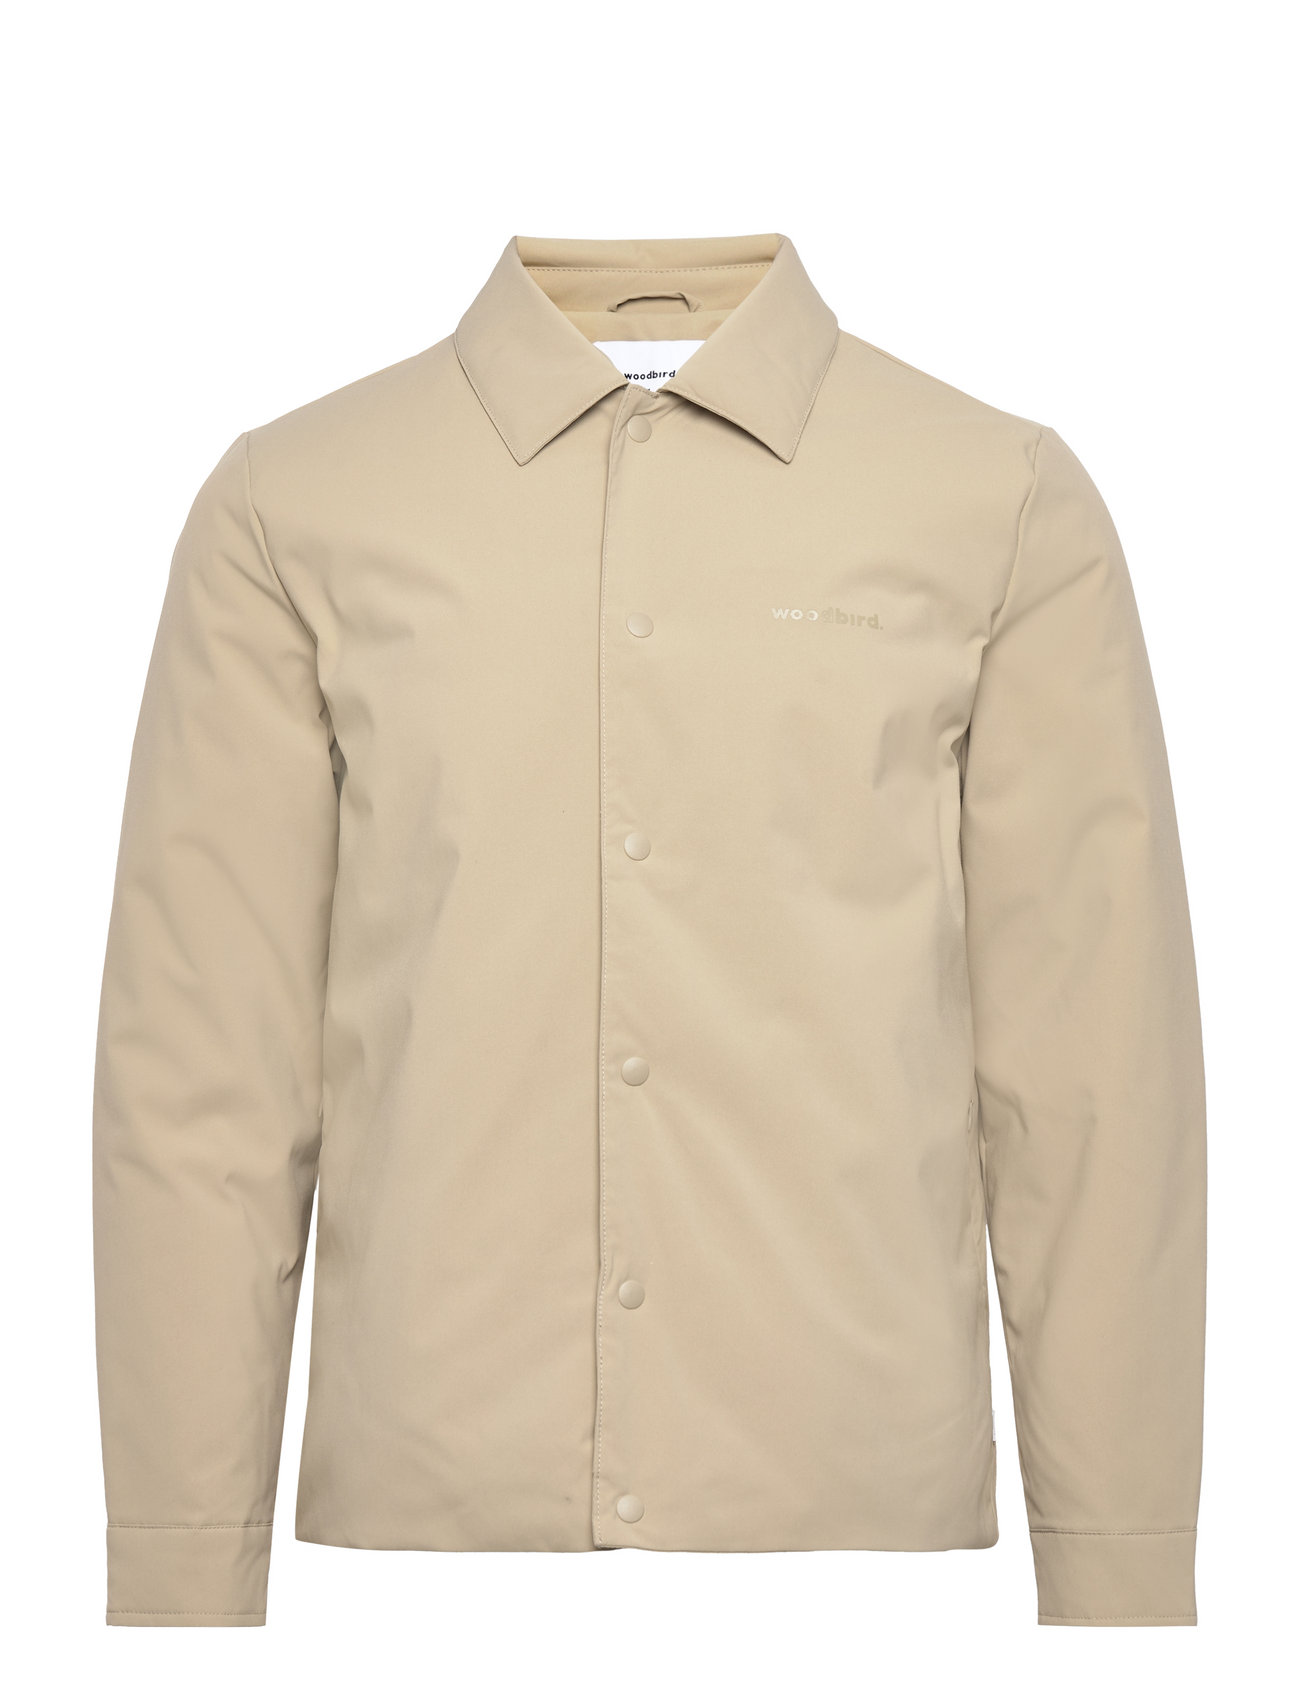 Woodbird Lewis Pad Jacket - 81.58 €. Buy Light Jackets from Woodbird online at Boozt.com. Fast delivery easy returns